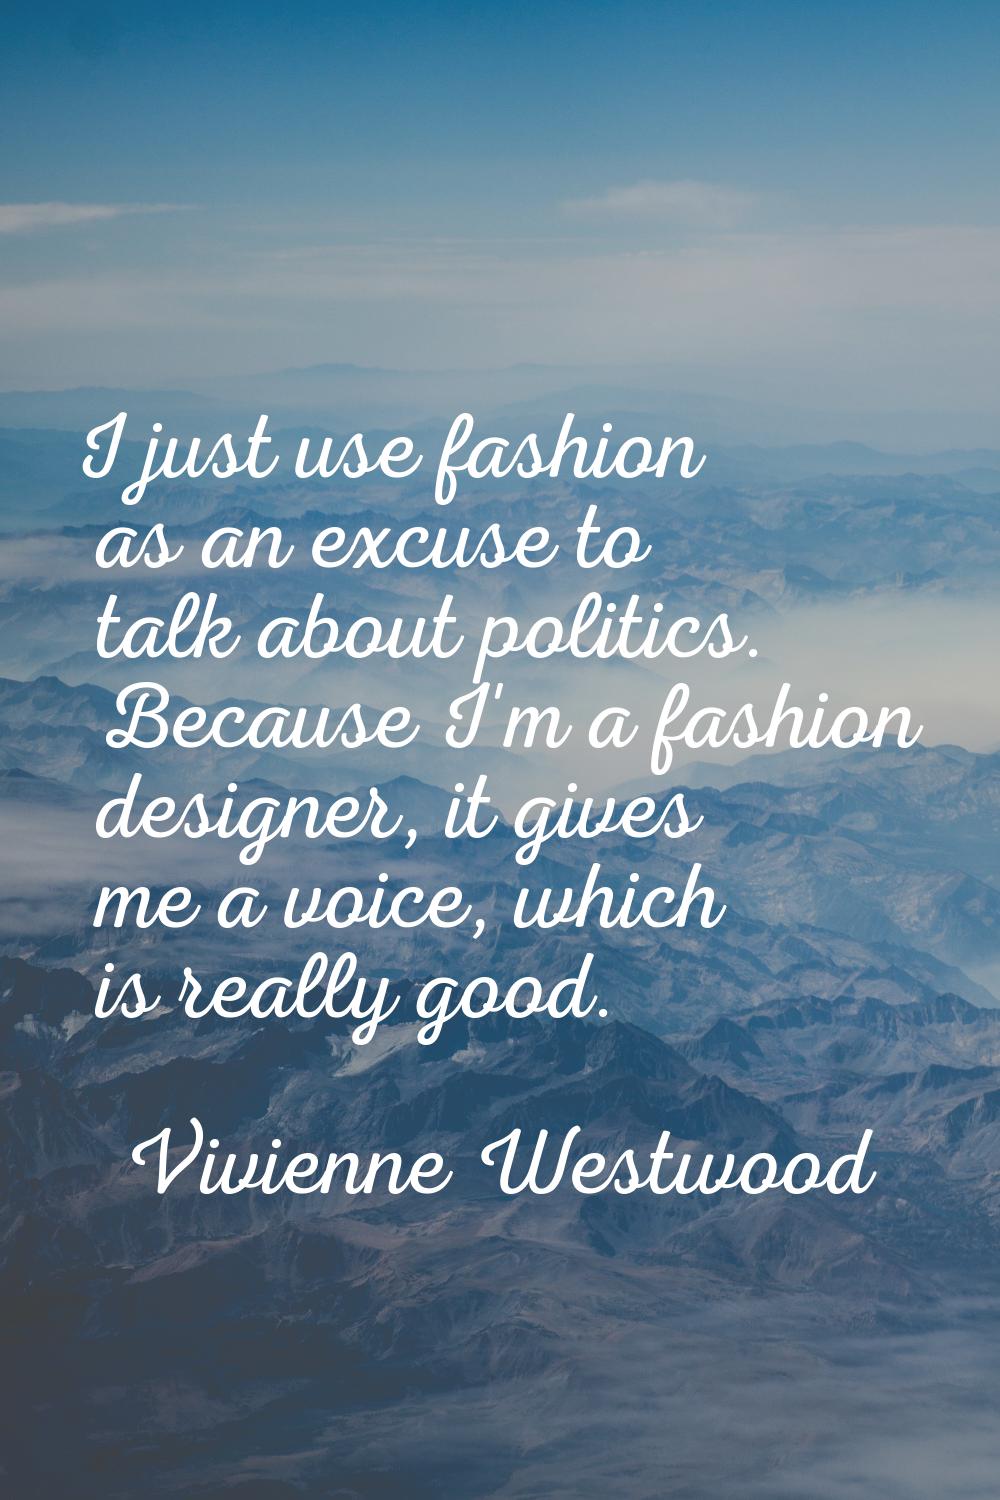 I just use fashion as an excuse to talk about politics. Because I'm a fashion designer, it gives me